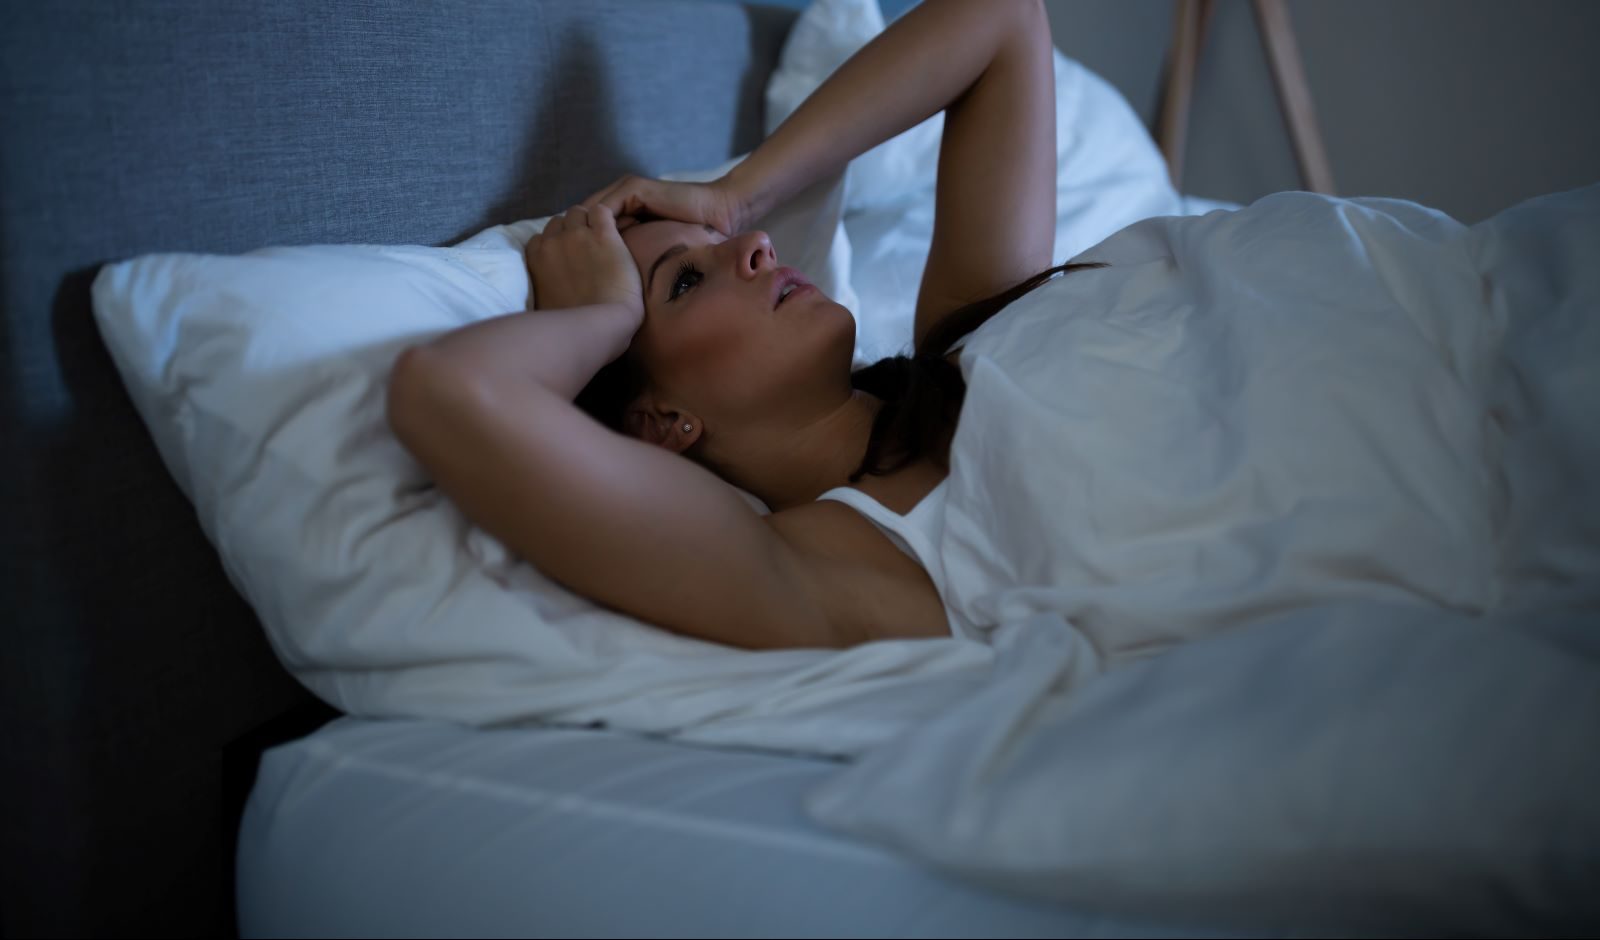 If you’re regularly having nightmares as an adult, it can mean something’s wrong with your health. A sleep expert has advice.